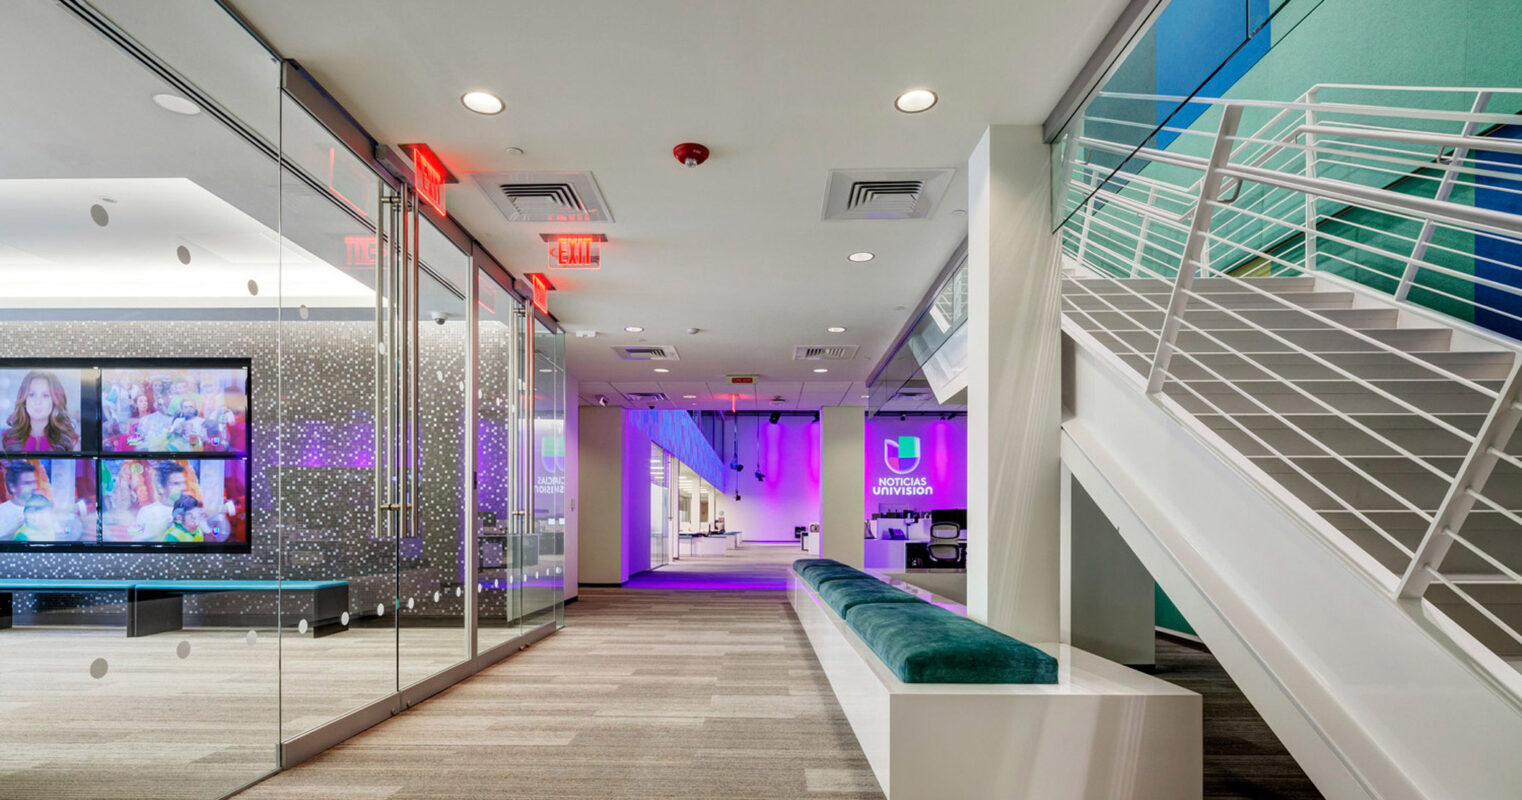 Modern office lobby with vibrant purple accent wall, sleek white staircase with transparent balustrades, and elongated teal bench seating. A multimedia display panel anchors the space, with dynamic lighting and a glass partition reflecting the contemporary design aesthetic.